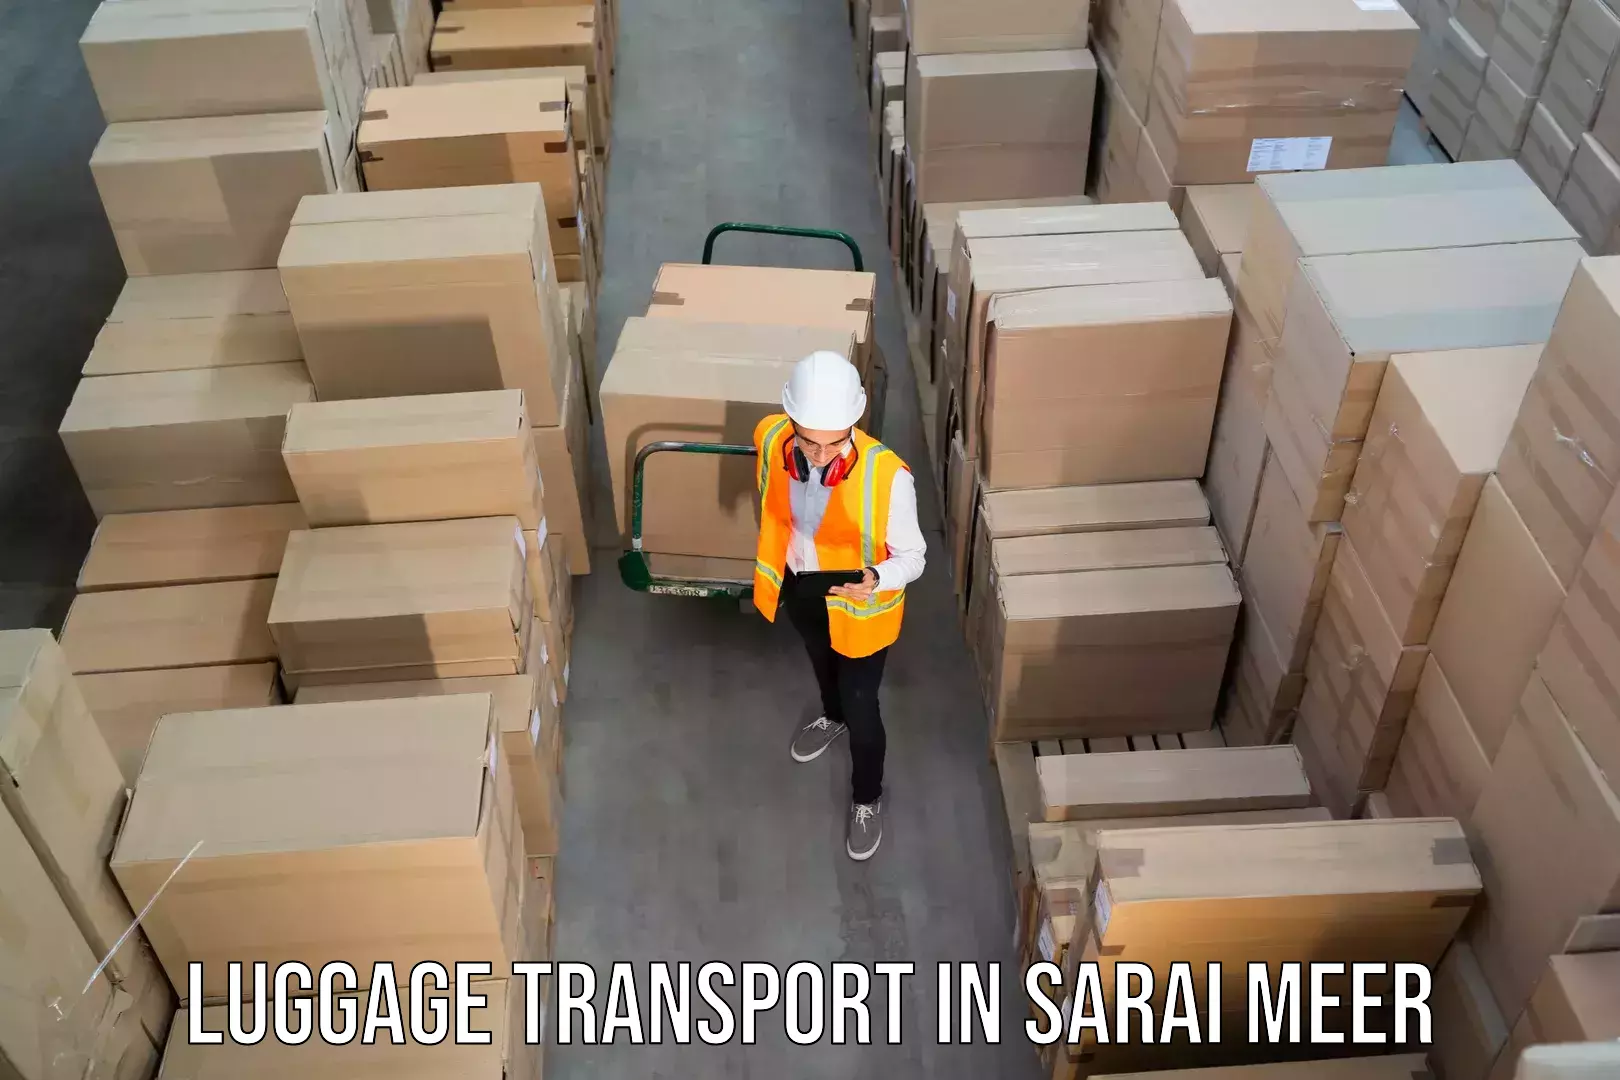 Luggage shipment specialists in Sarai Meer